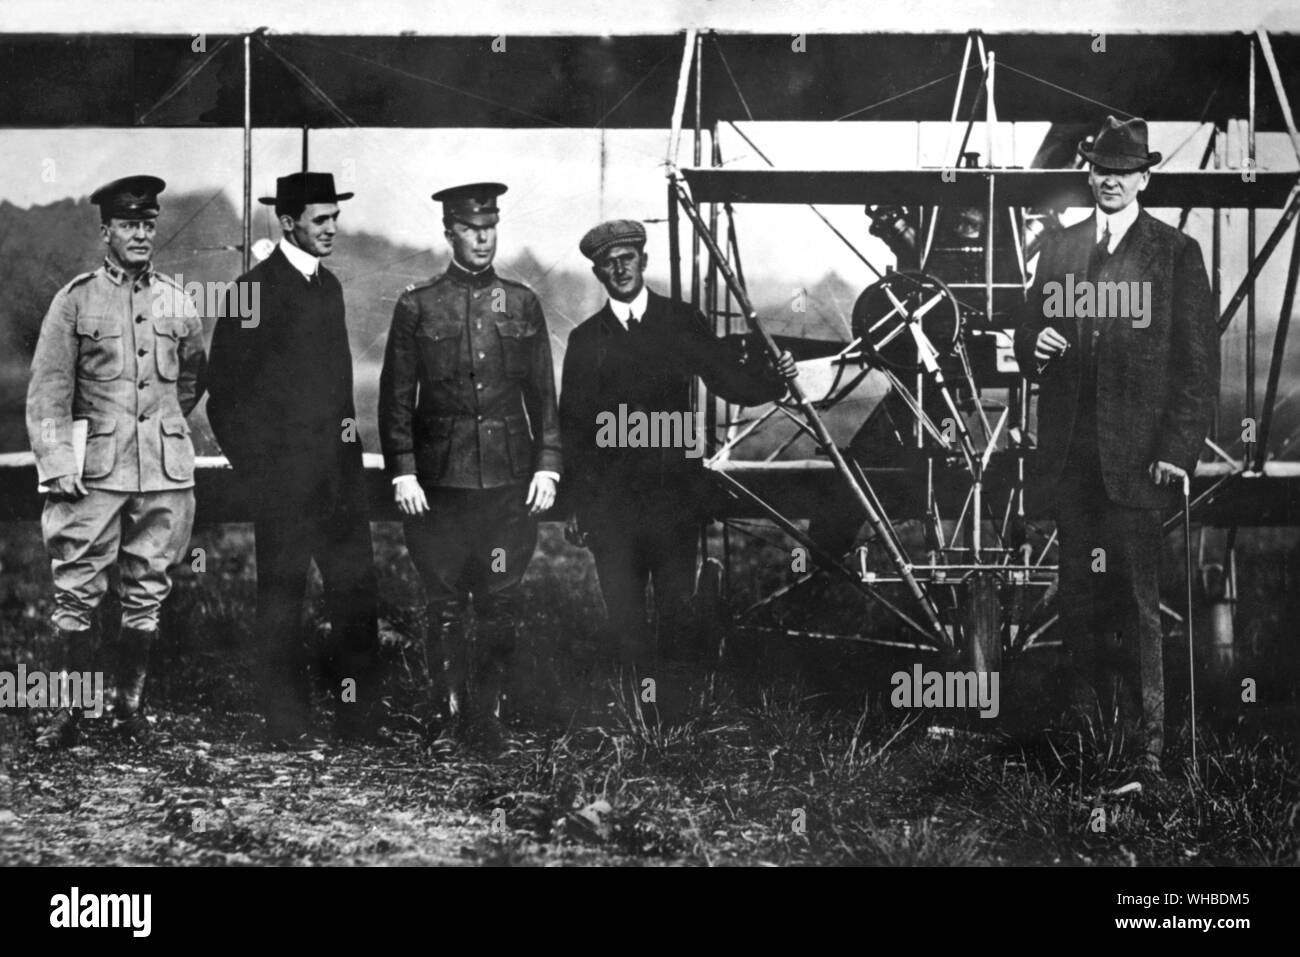 Mgrmla - Arnold - Chandler - Beachy - Moore - The world's first air force avec le premier avion militaire, 1909.. Banque D'Images